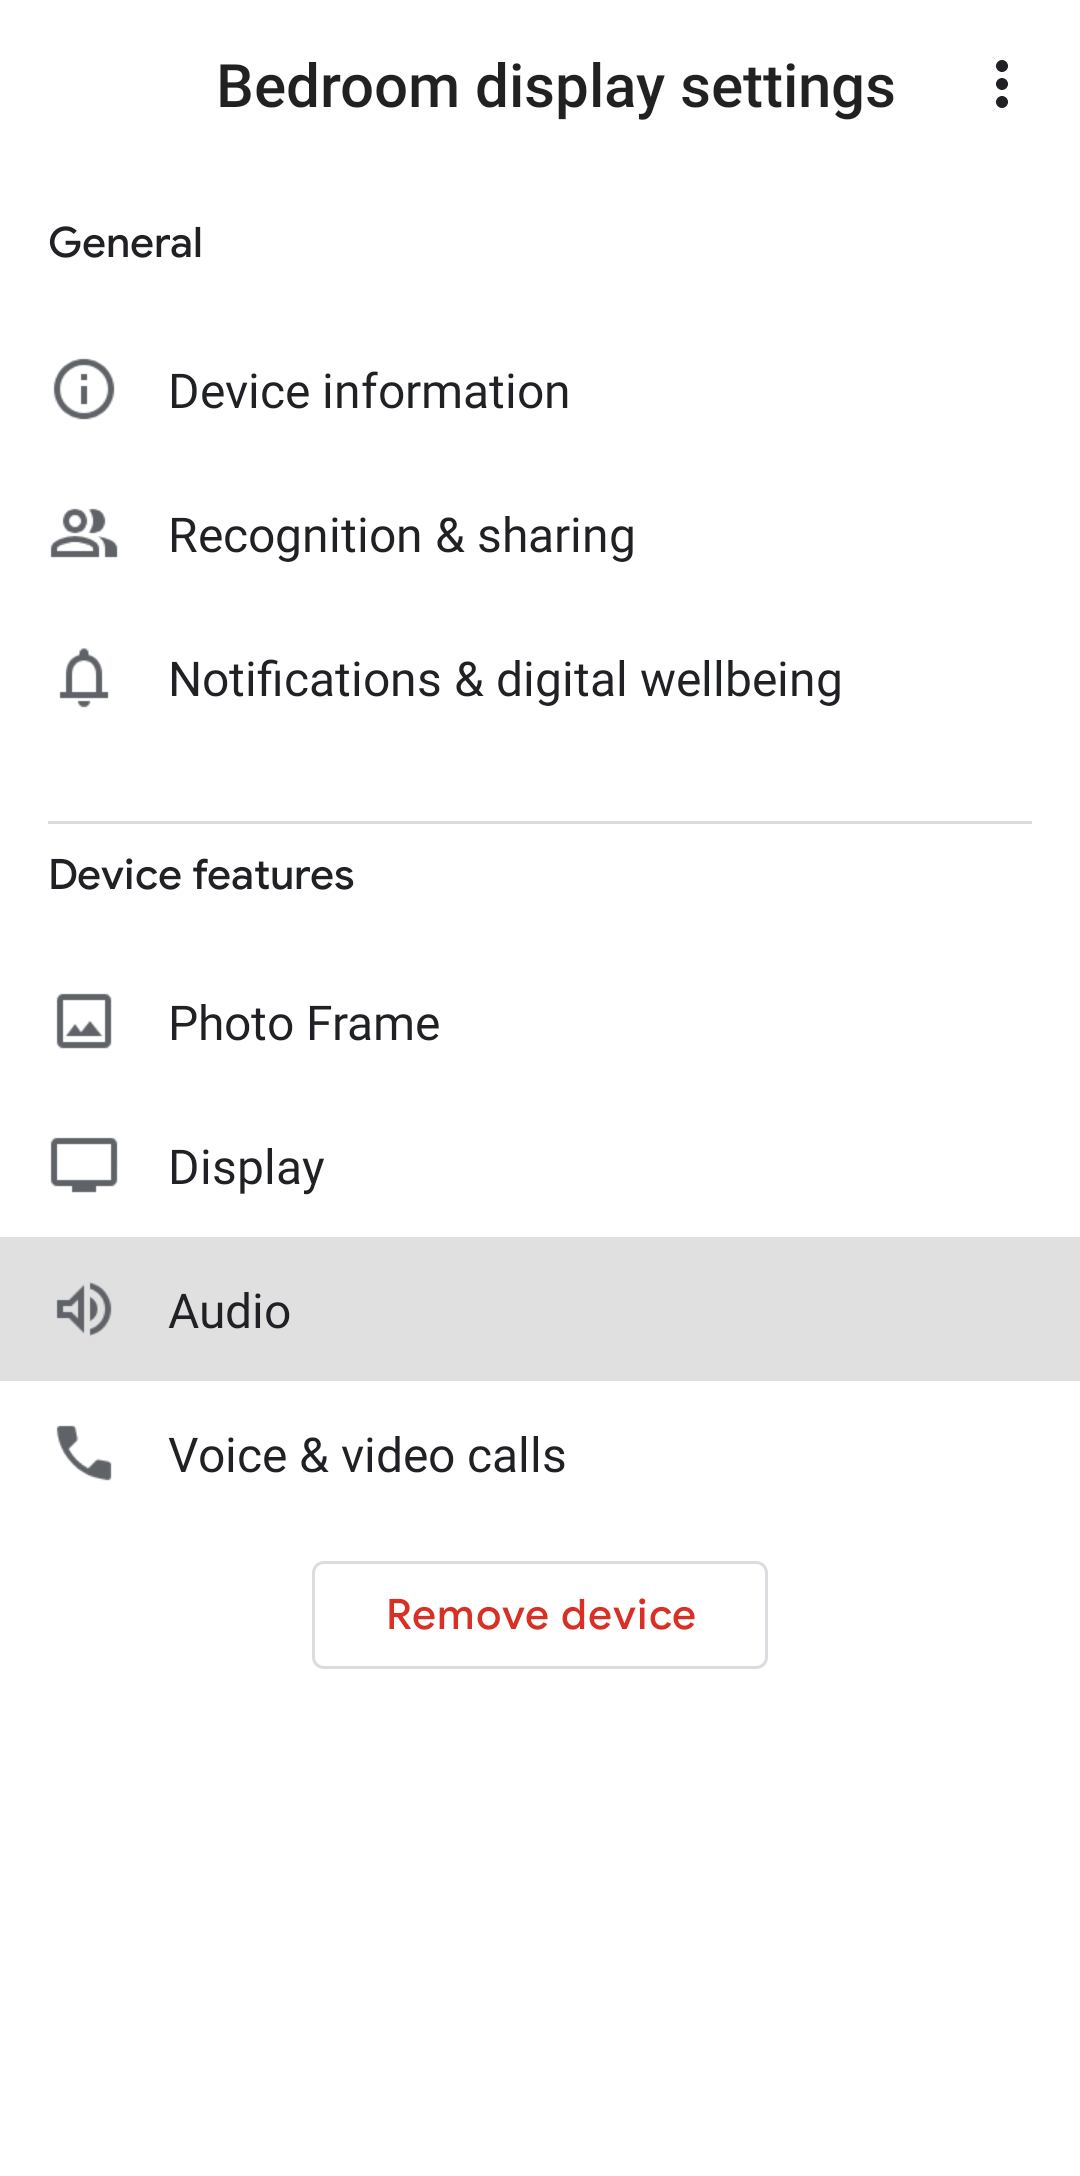 Screenshot shows the Bedroom display settings page in the Google Home app.